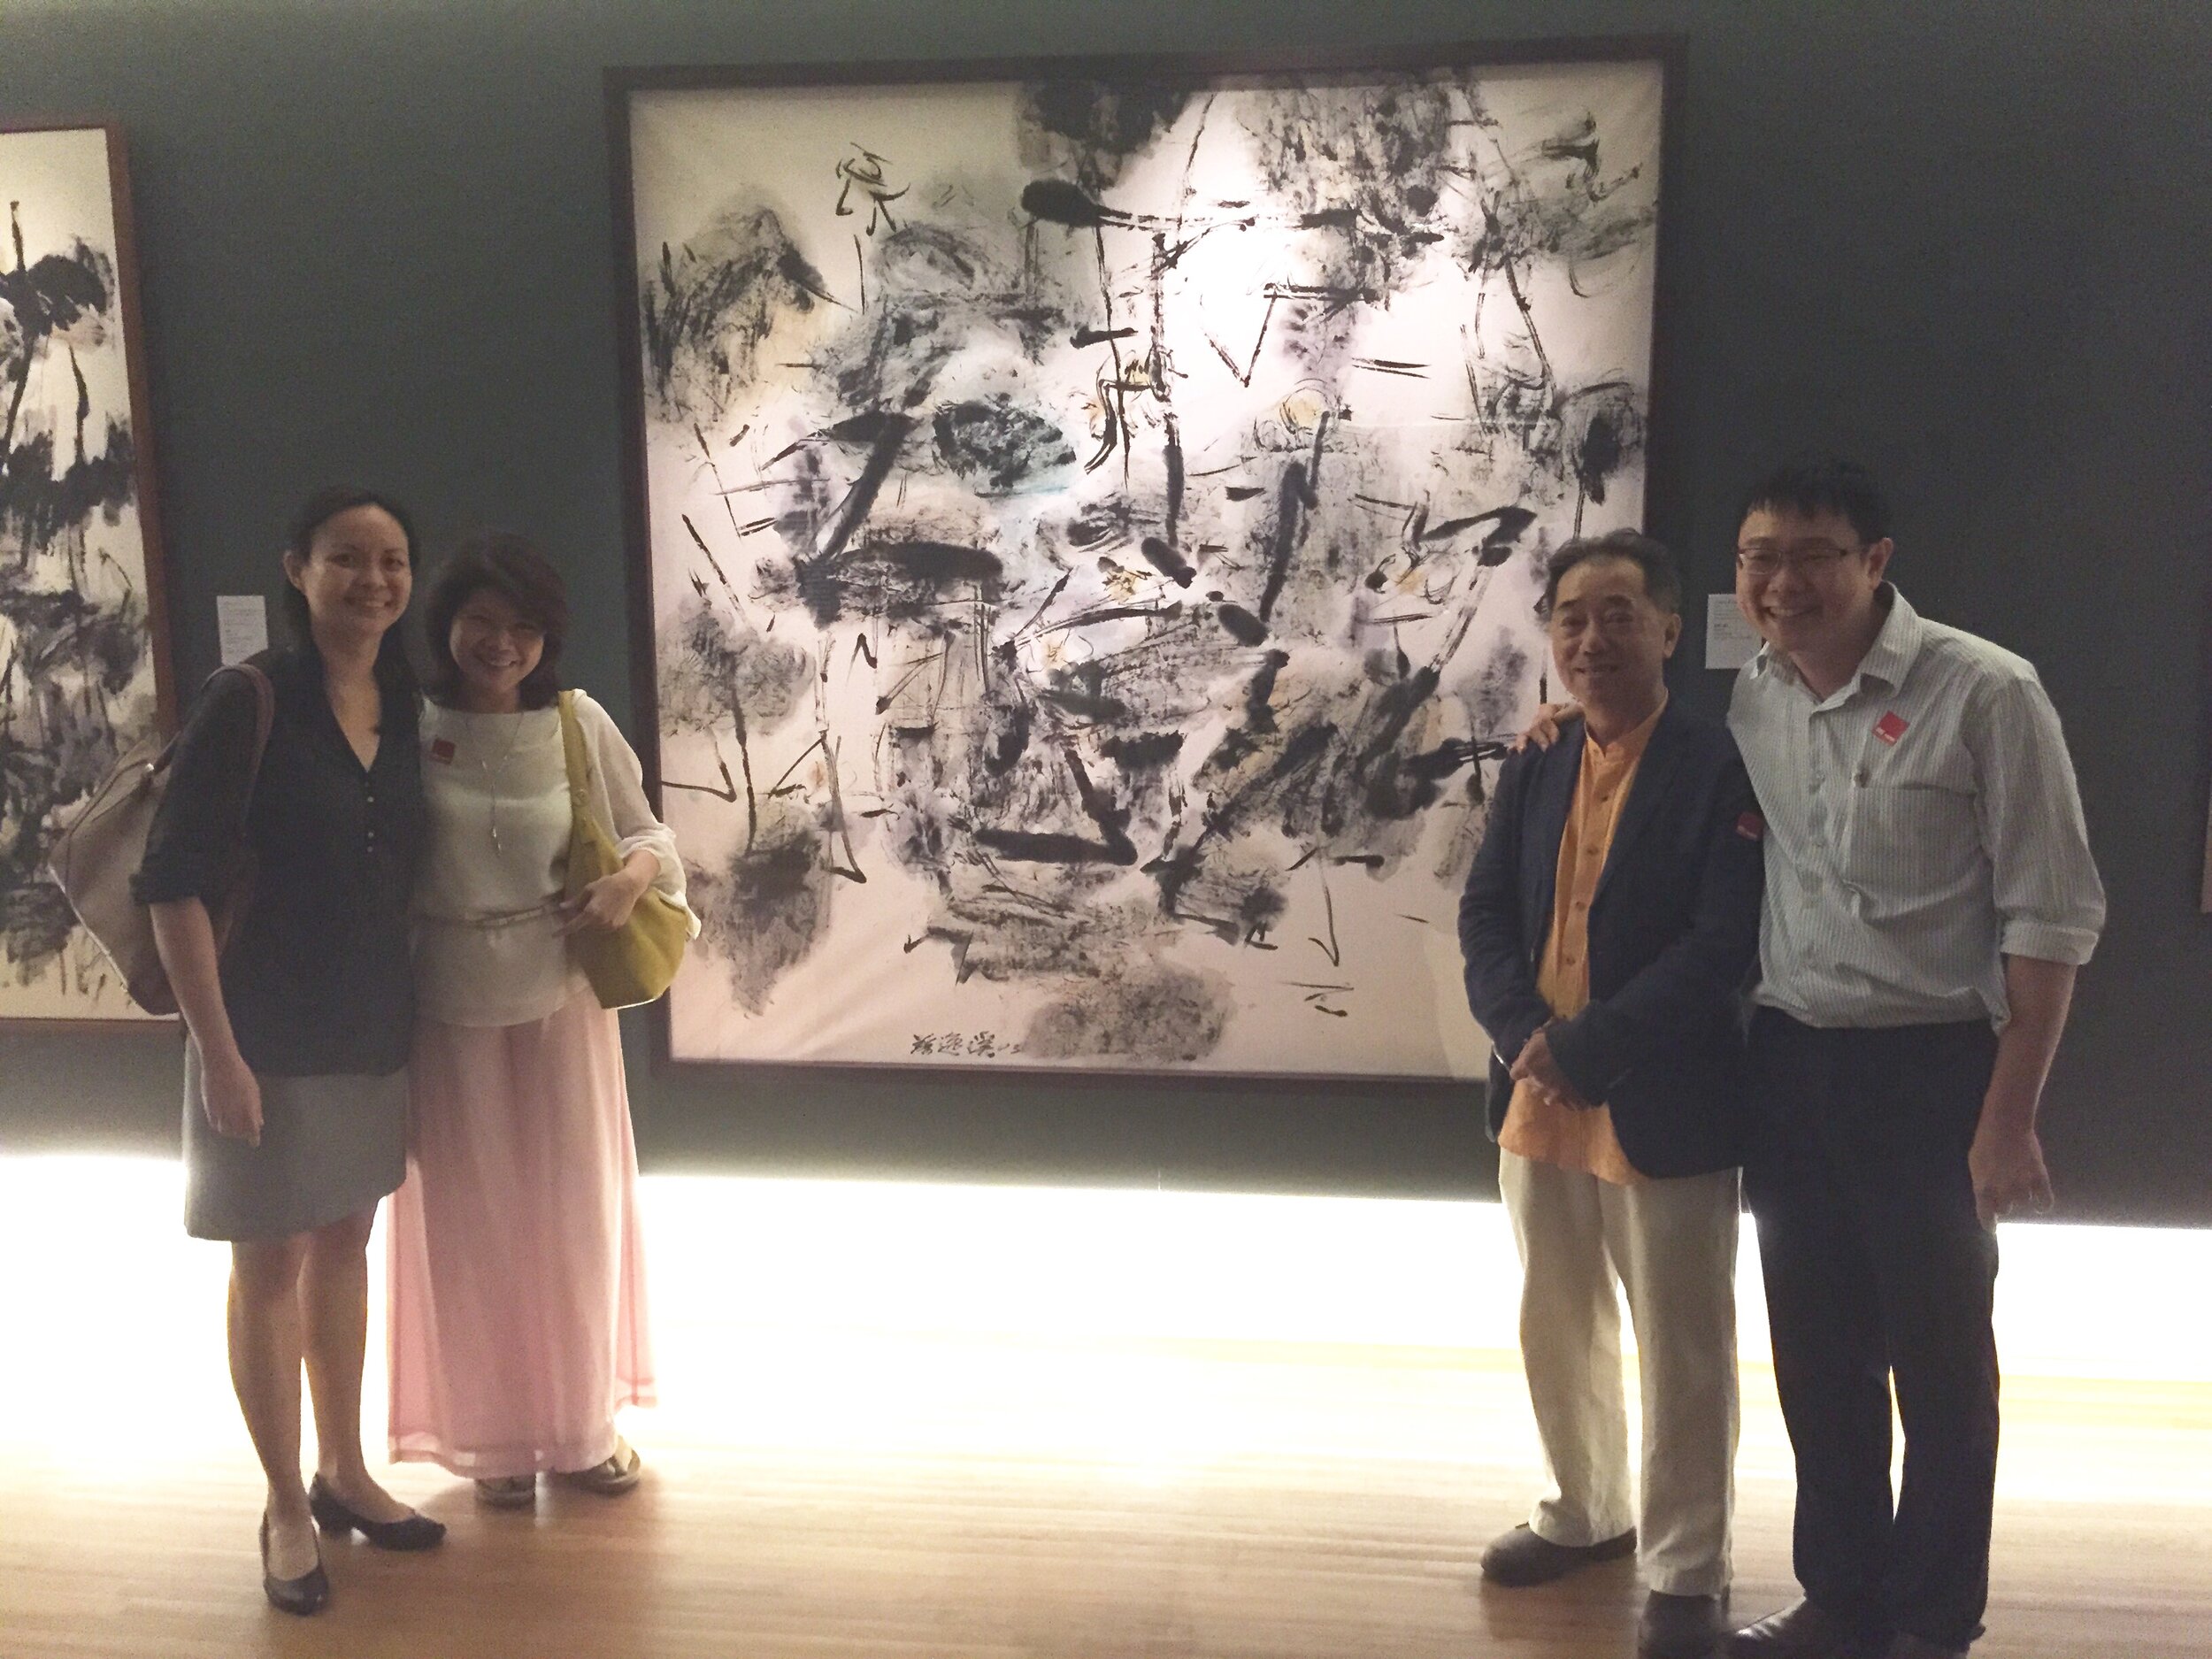  Chua Ek Kay: After The Rain at the National Gallery Singapore in 2016  